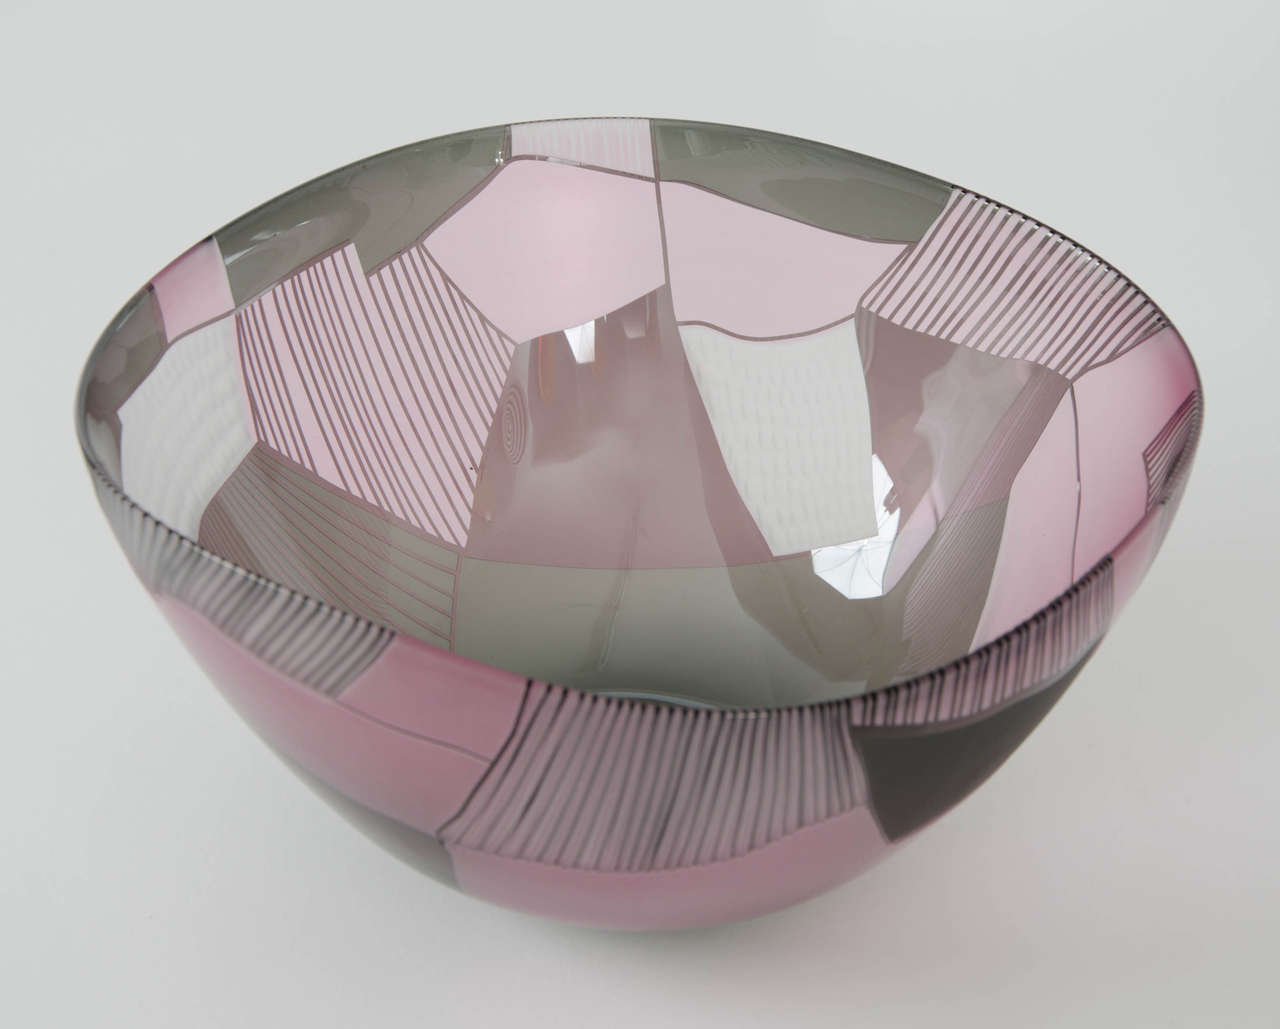 Blown glass centrepiece by Kate Jones. Gillies Jones established their partnership in 1995 with a shared passion to explore blown art glass. Works are created with Stephen Gillies as the glass maker and Kate Jones as the ‘painter’. However rather